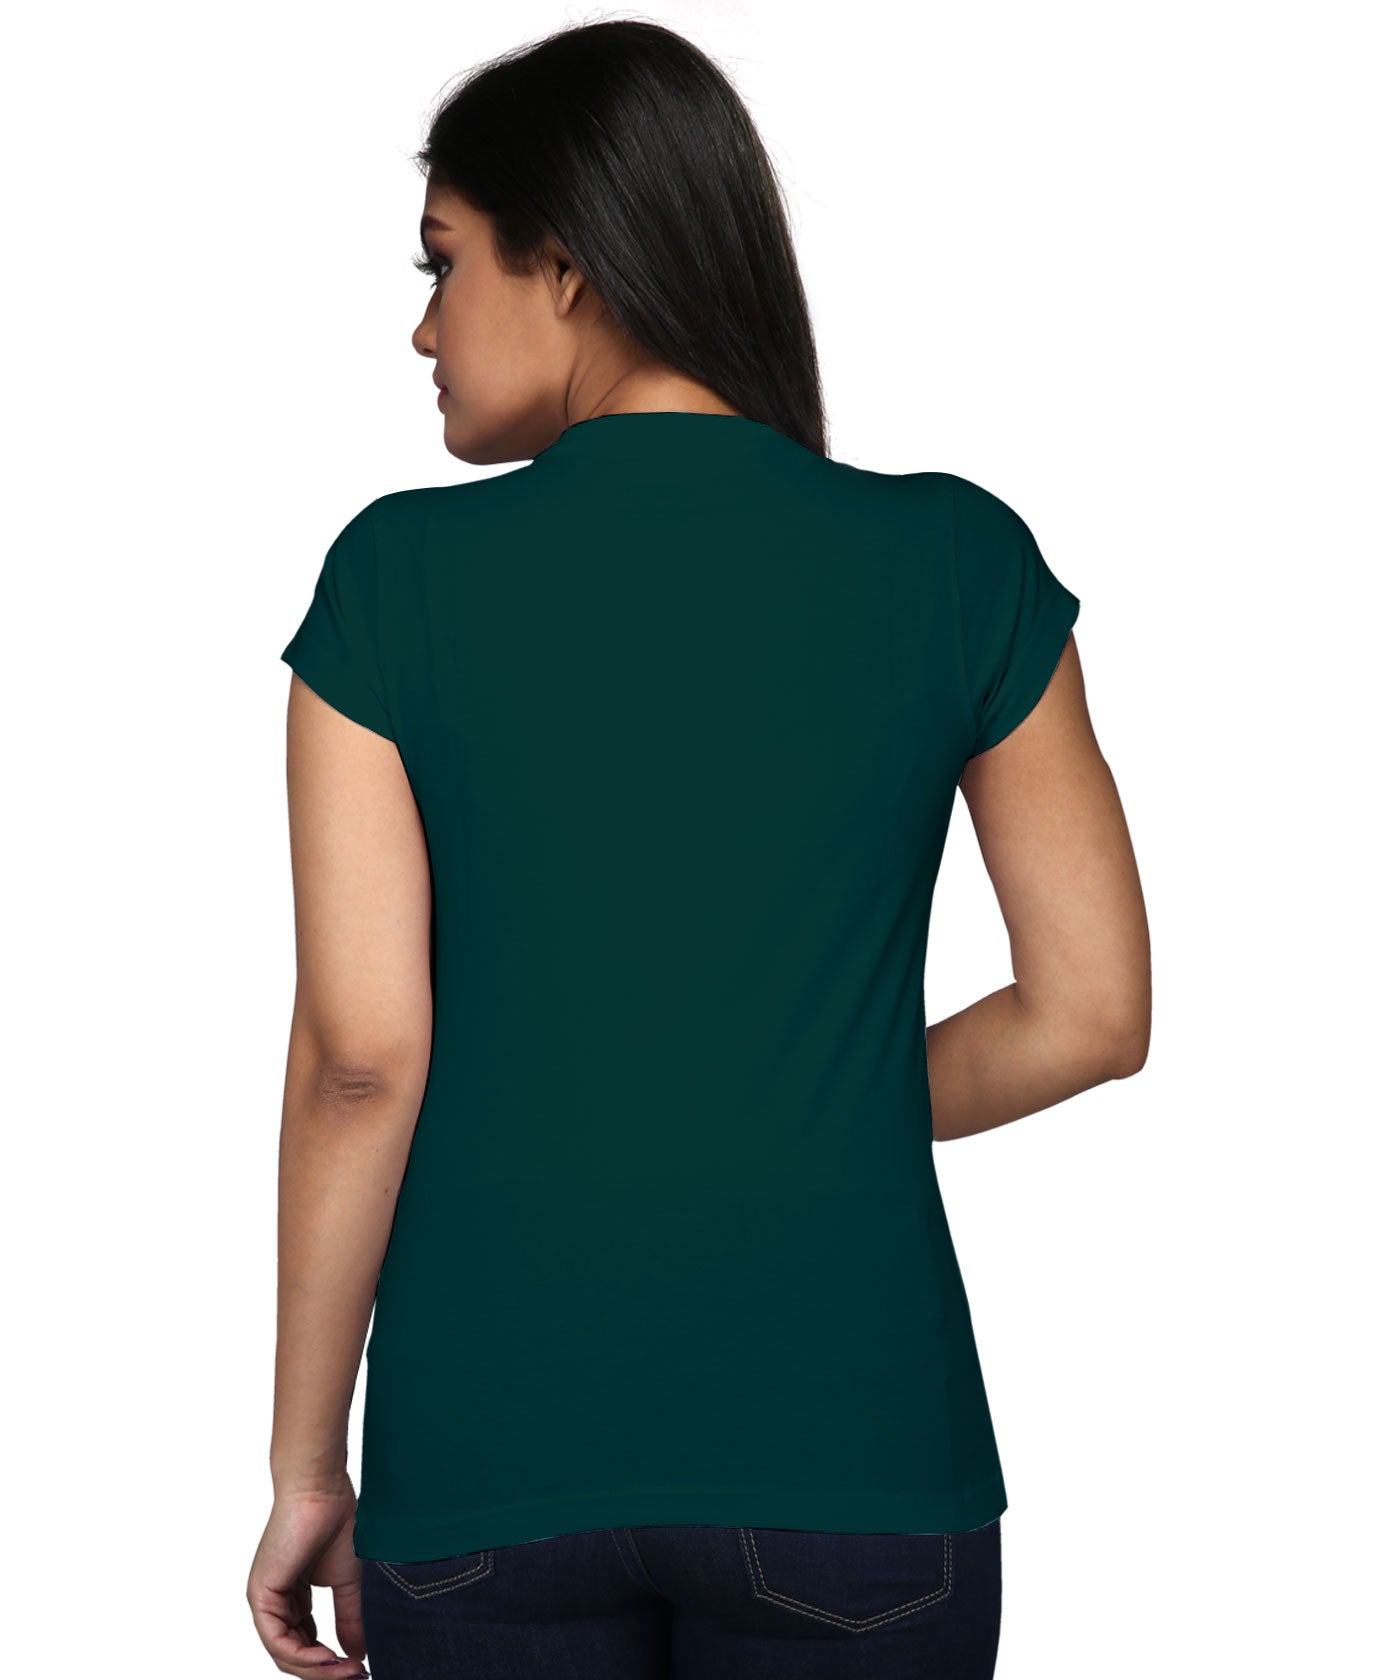 Rose At Right Side - Block Print Tees for Women - Cactus Green